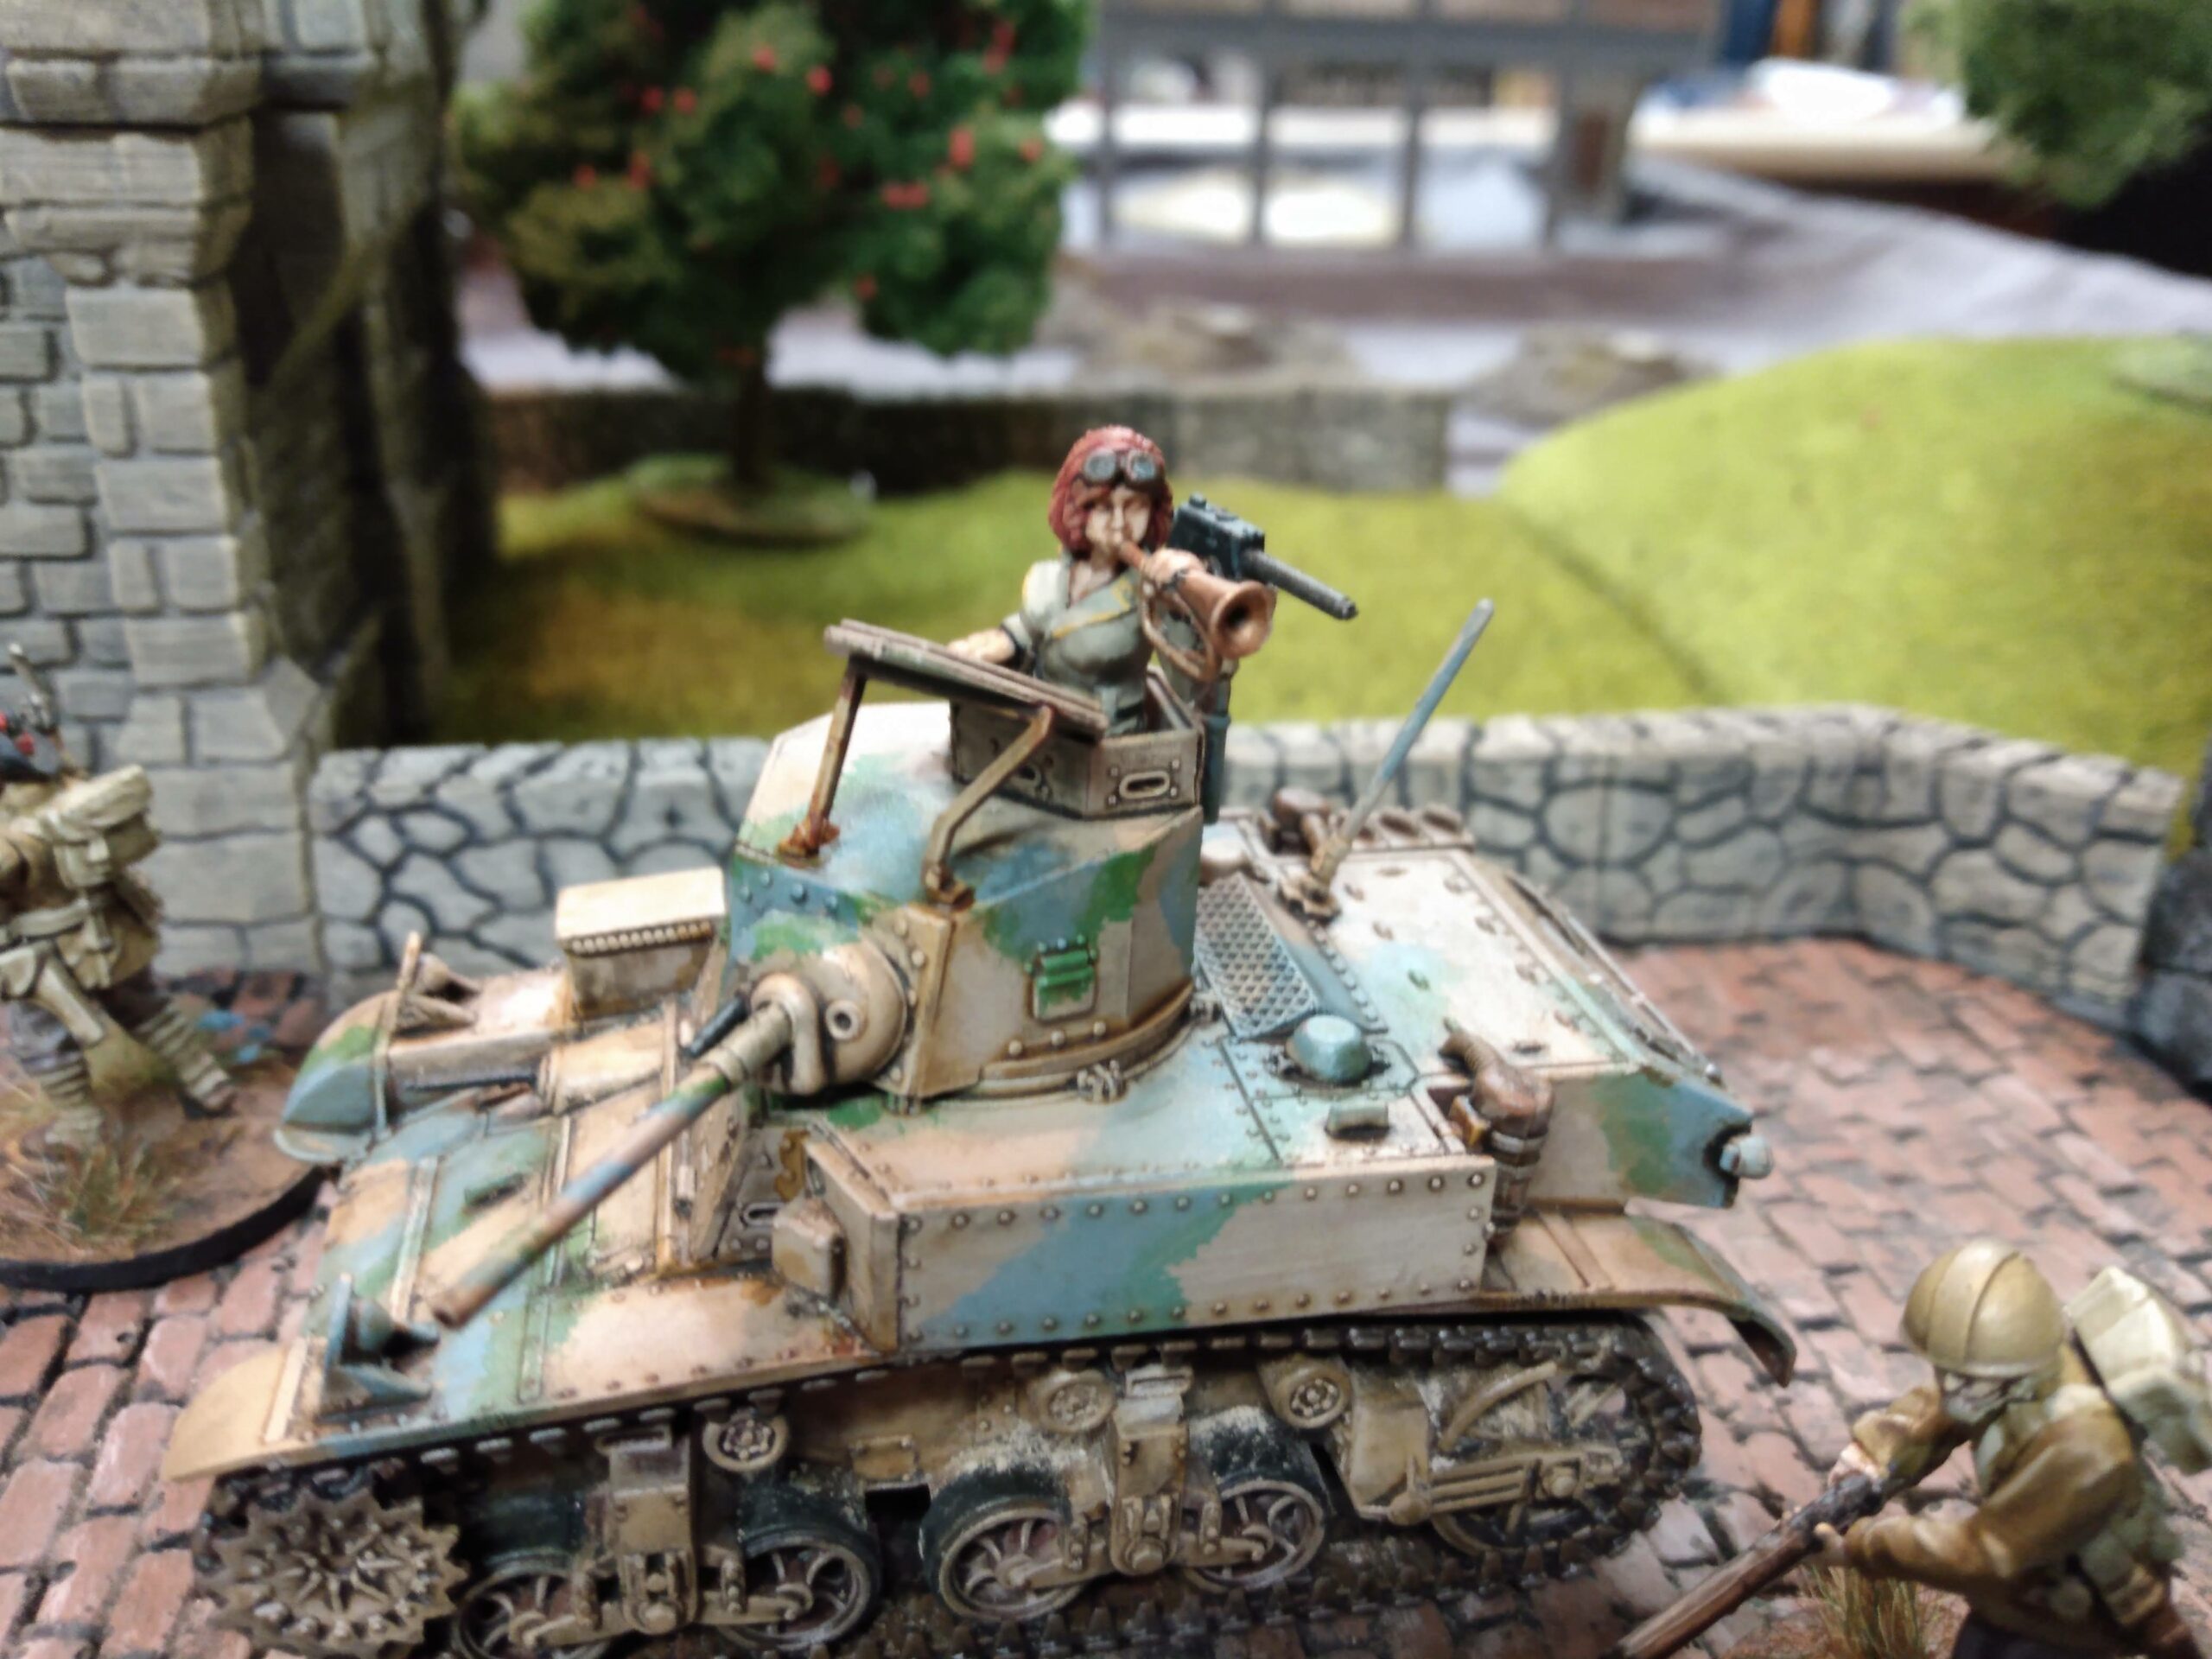 Alternate history Confederate Stuart tank commanded by female cavalry sergeant, girls und panzer style.